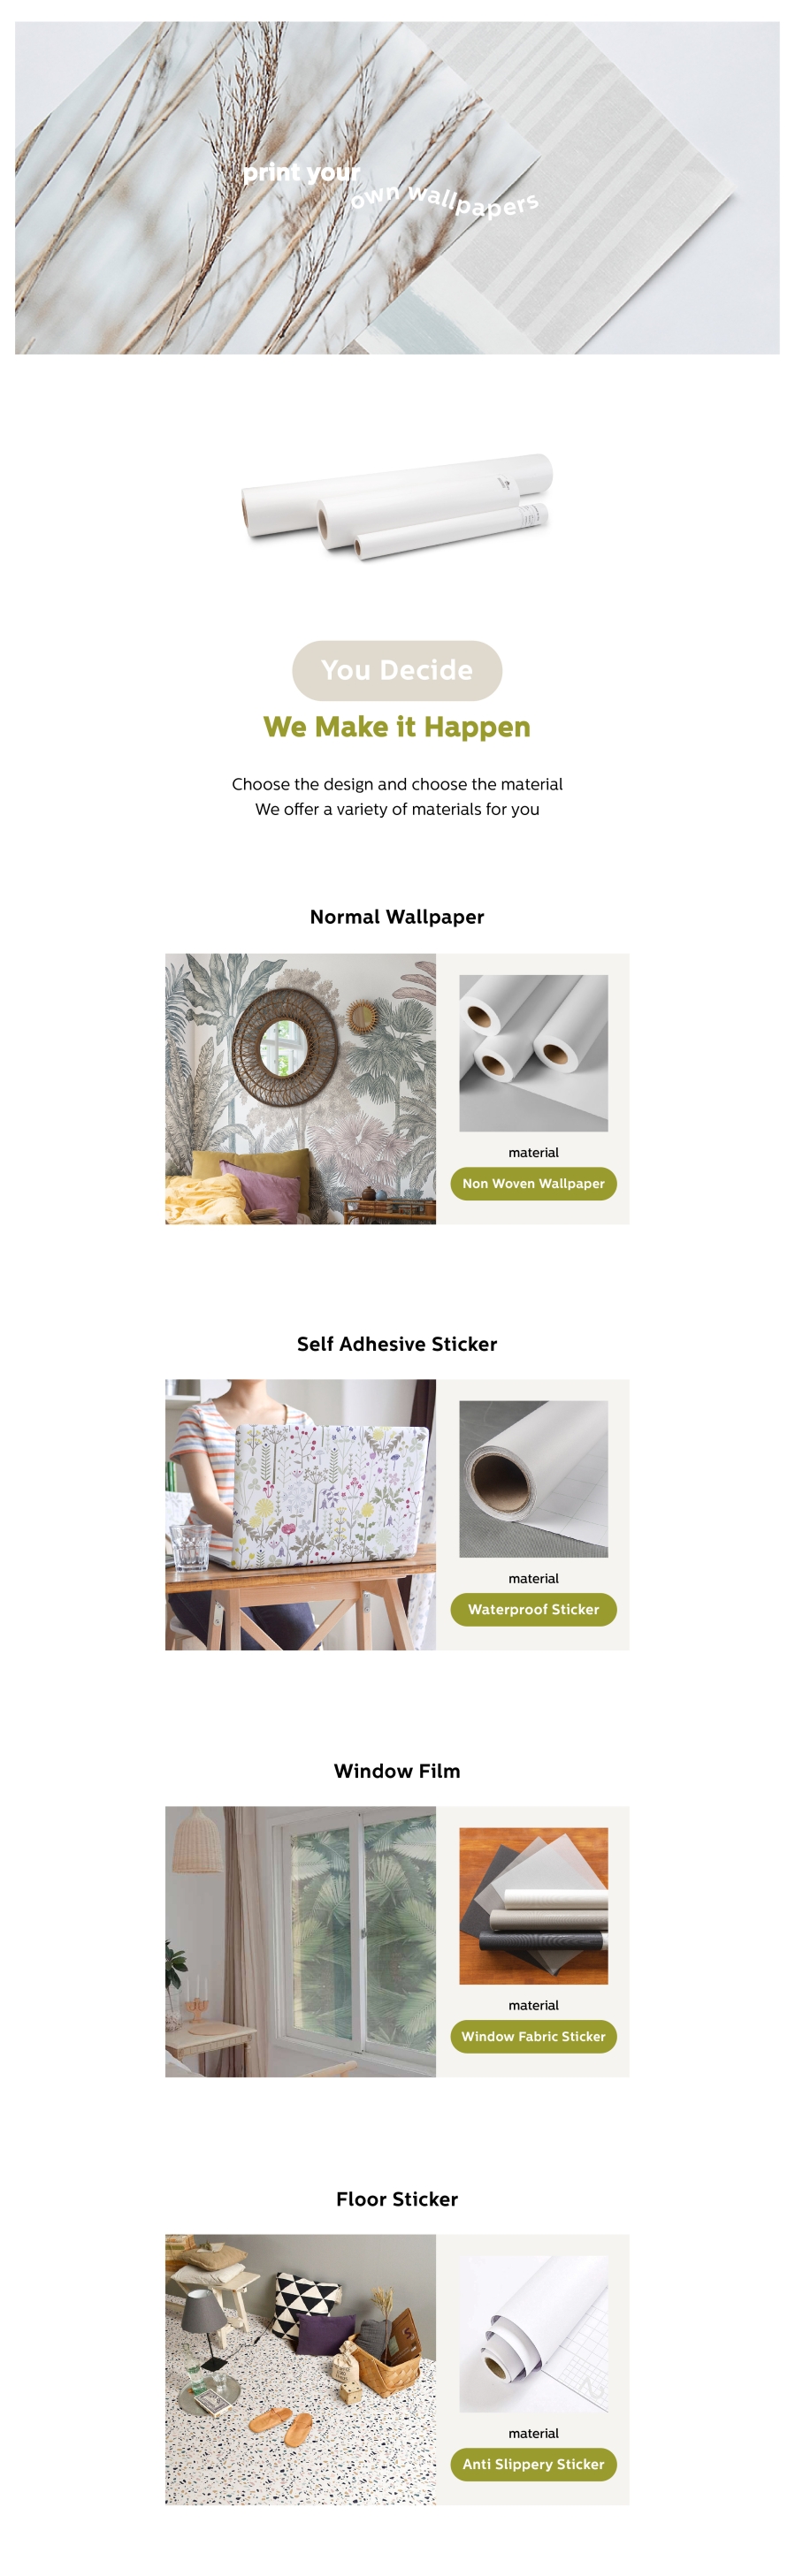 Transform your living space with Custom Wallpaper from HONPO